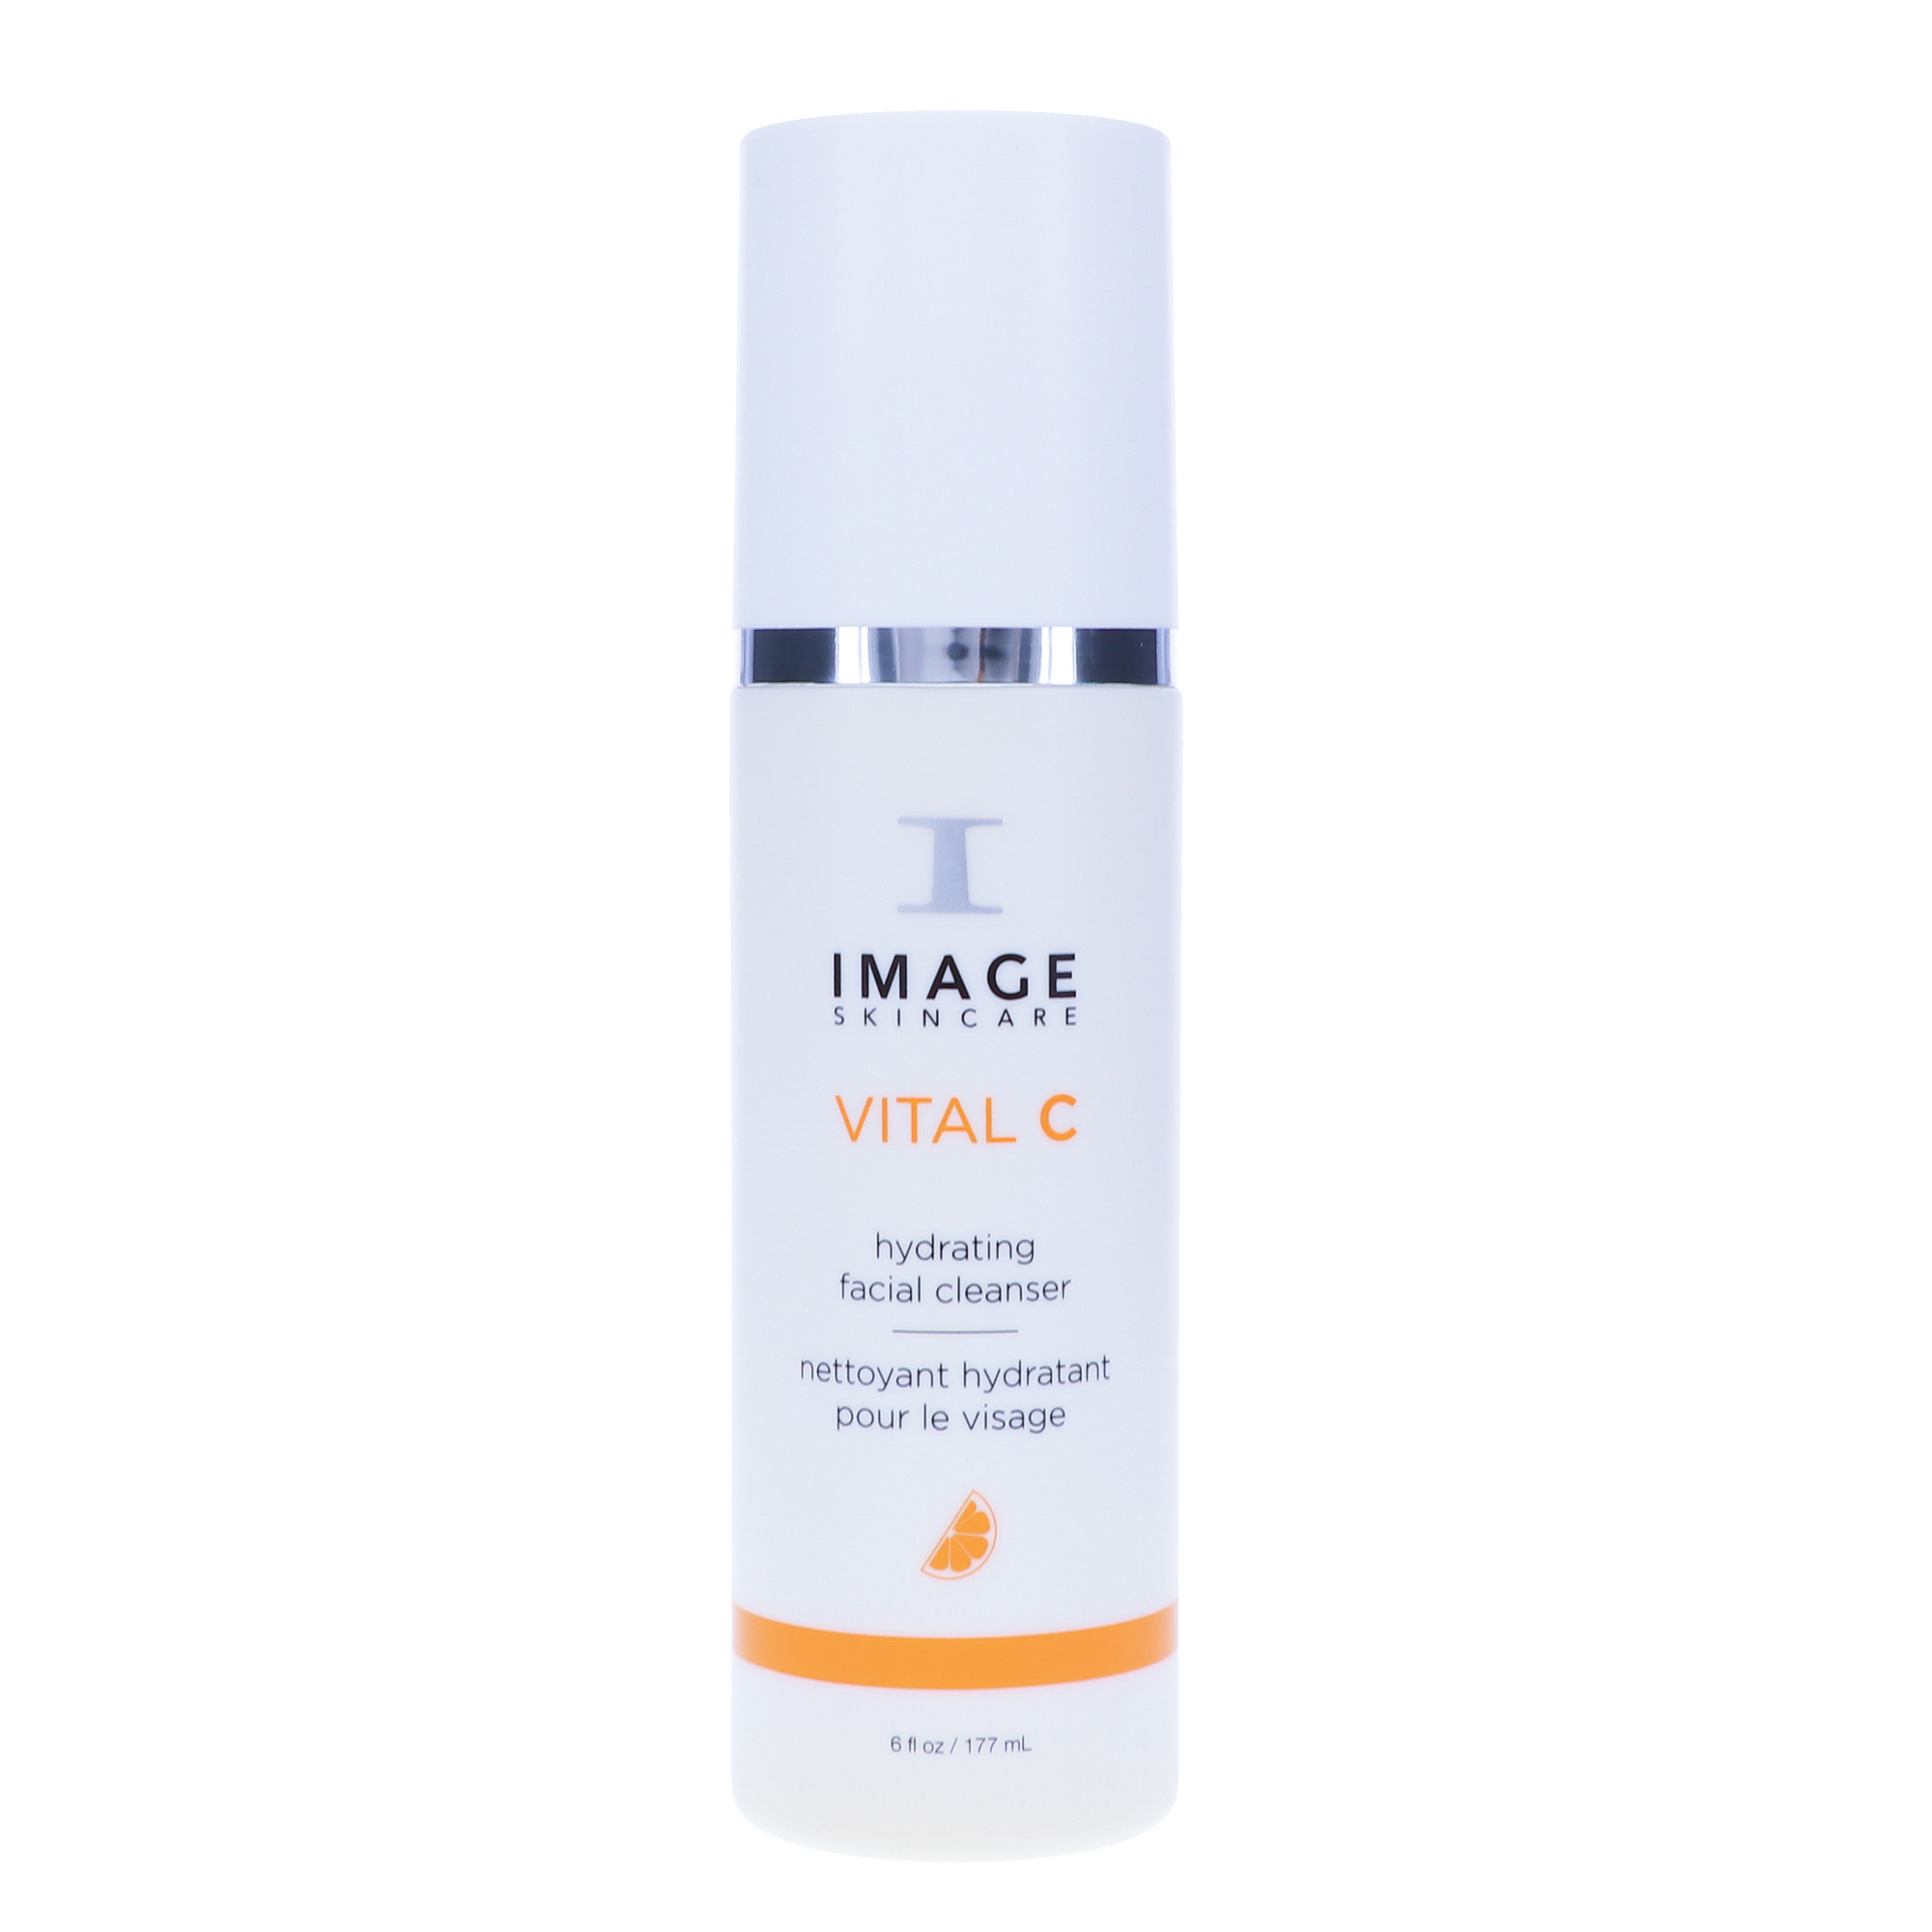 IMAGE Skincare Vital C Hydrating Facial Cleanser 6 oz - image 4 of 9